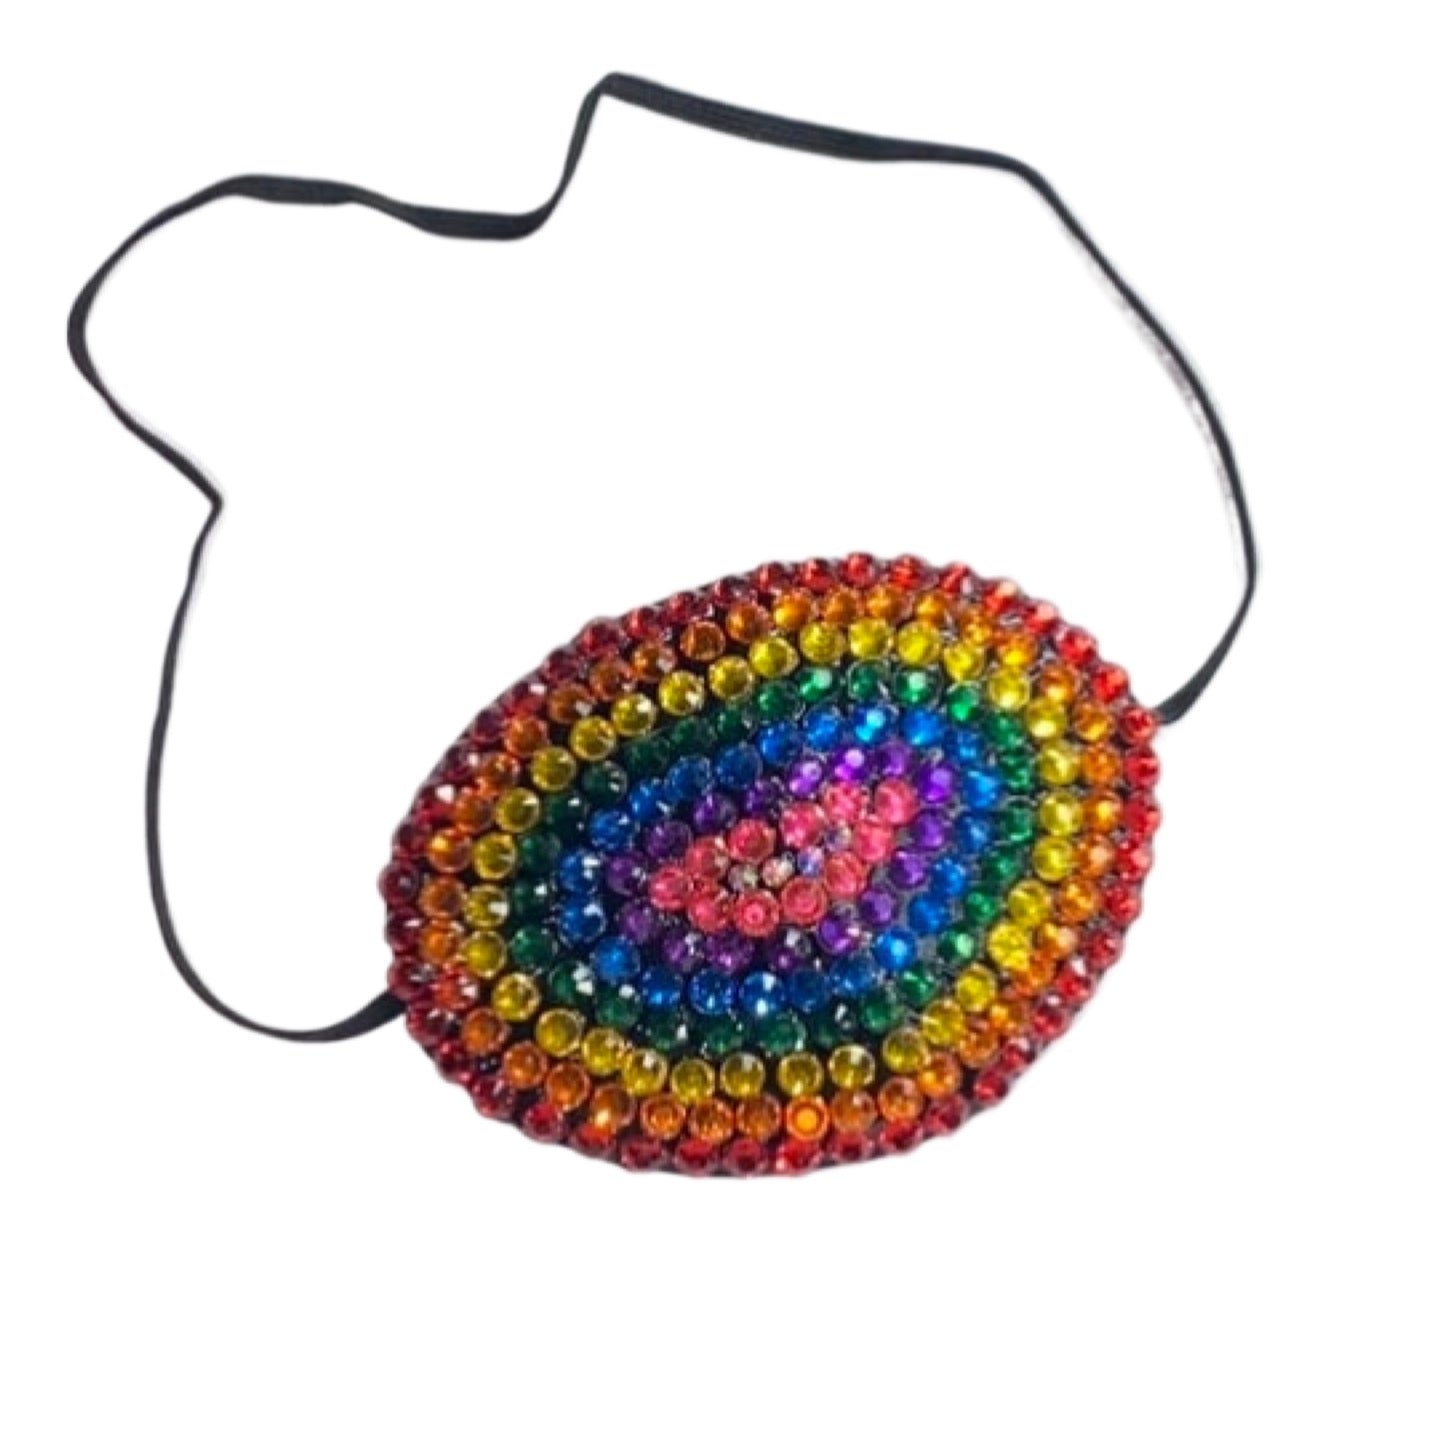 Black Eye Patch Bedazzled In Rainbow Multi Colour Crystals